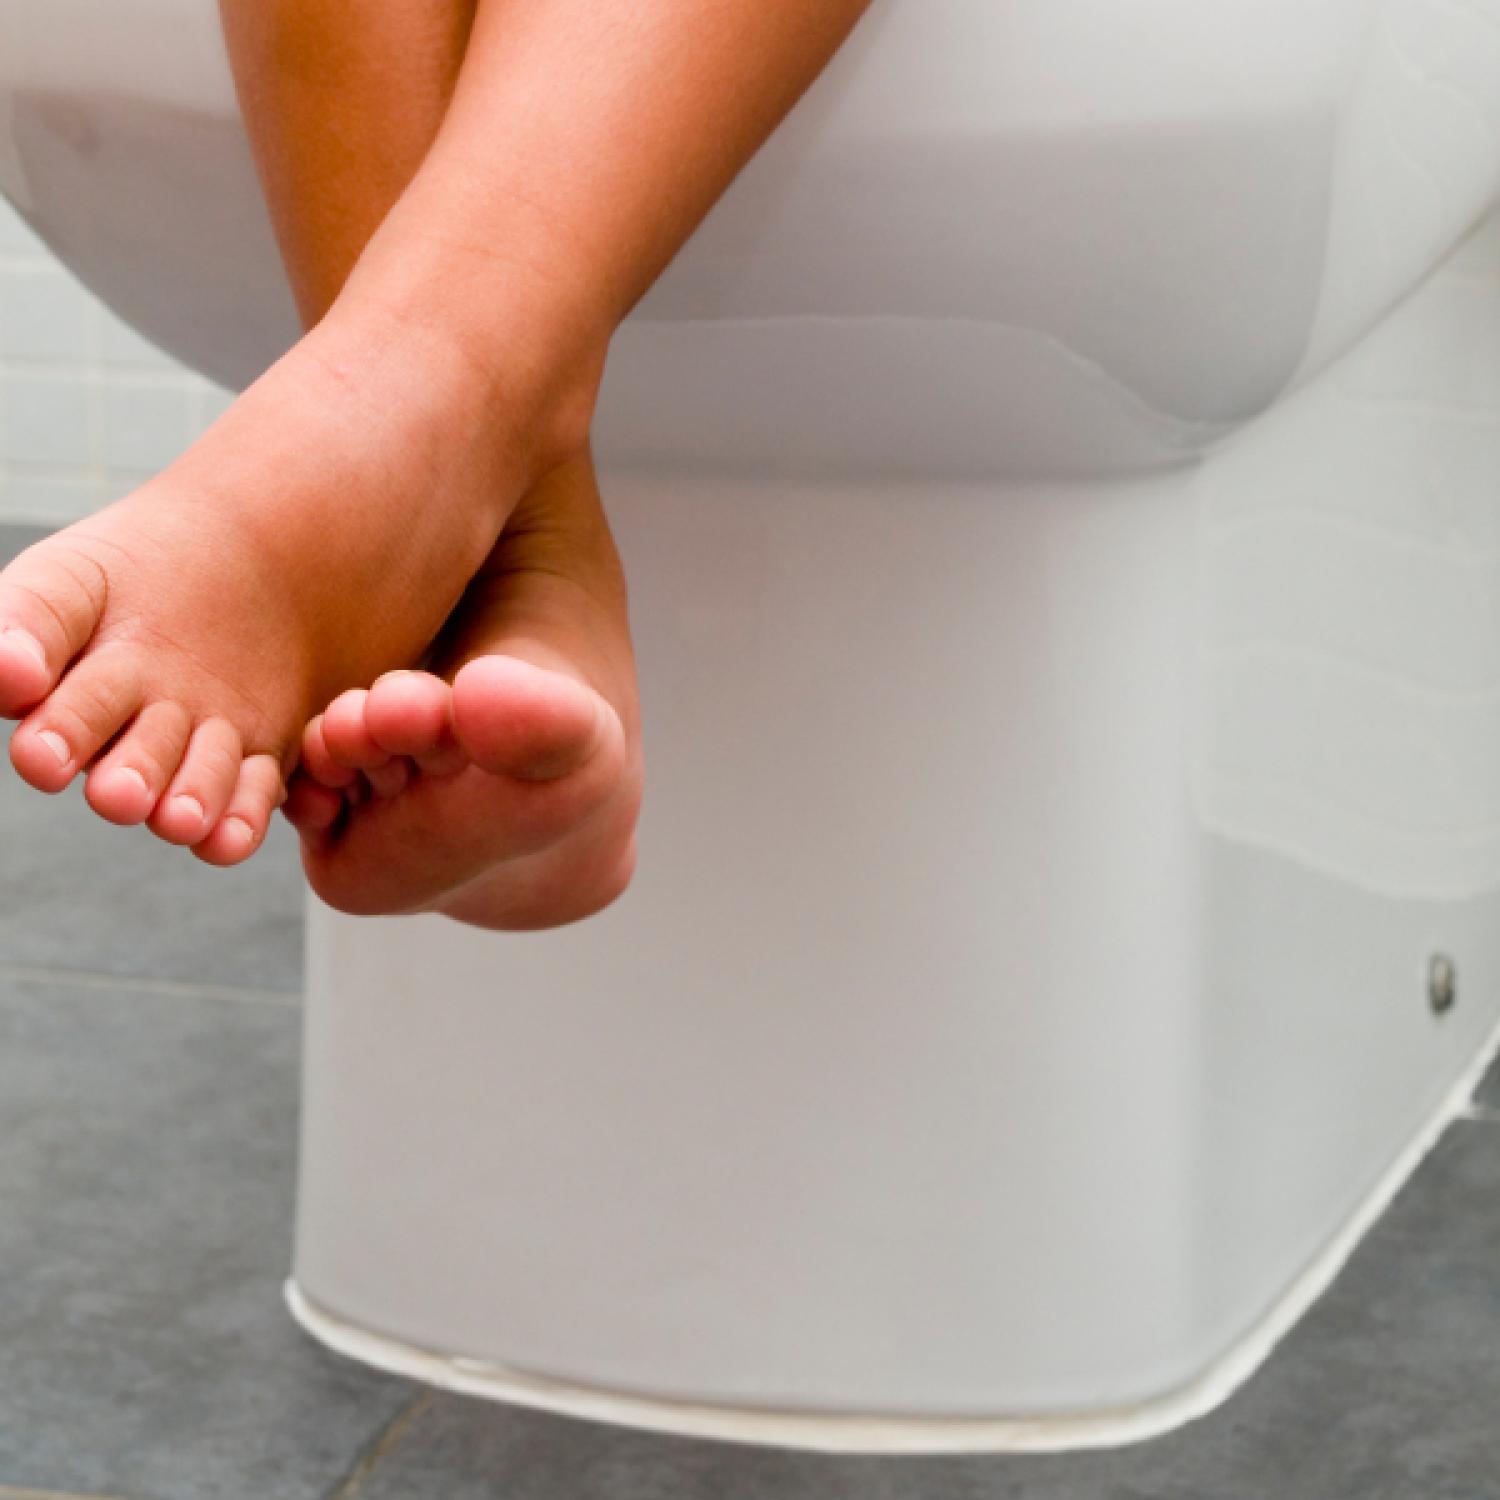 Top 9 Potty Training Questions and Answers